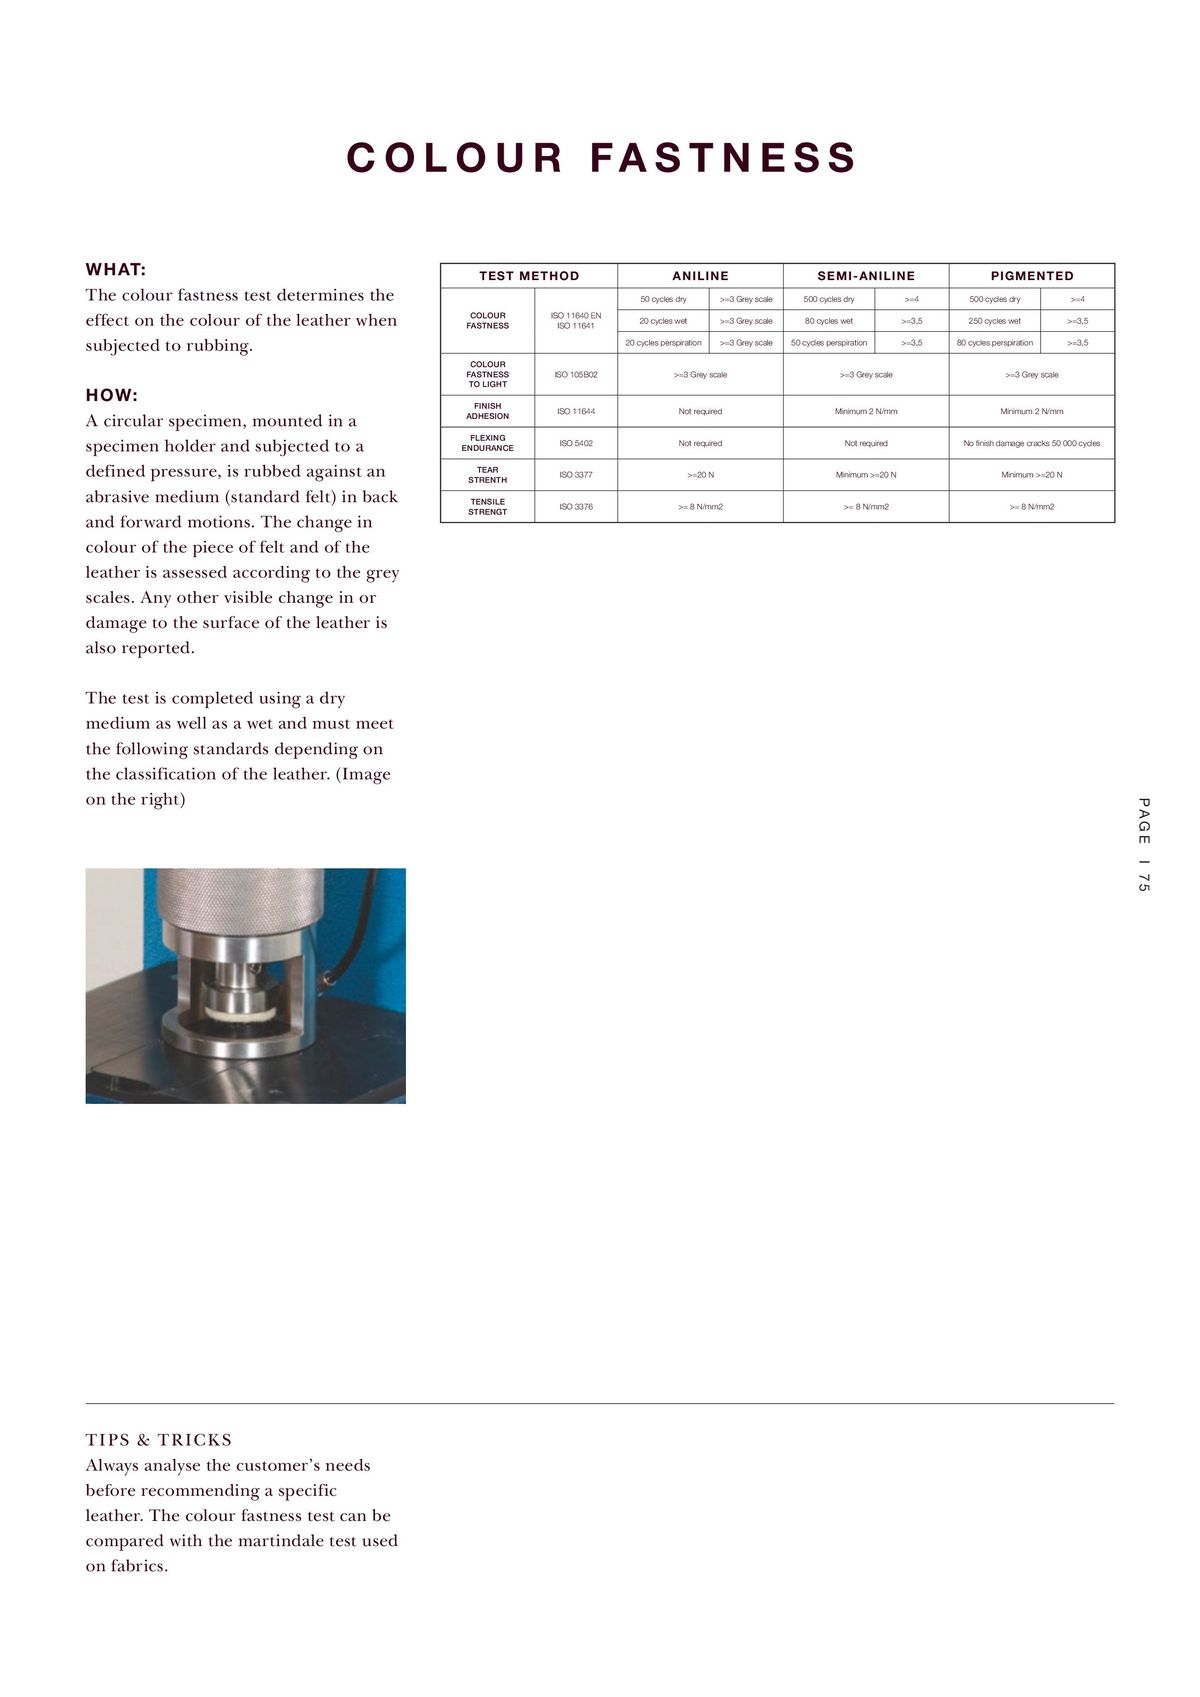 Catalogue Explore our contract materials guide, page 00075